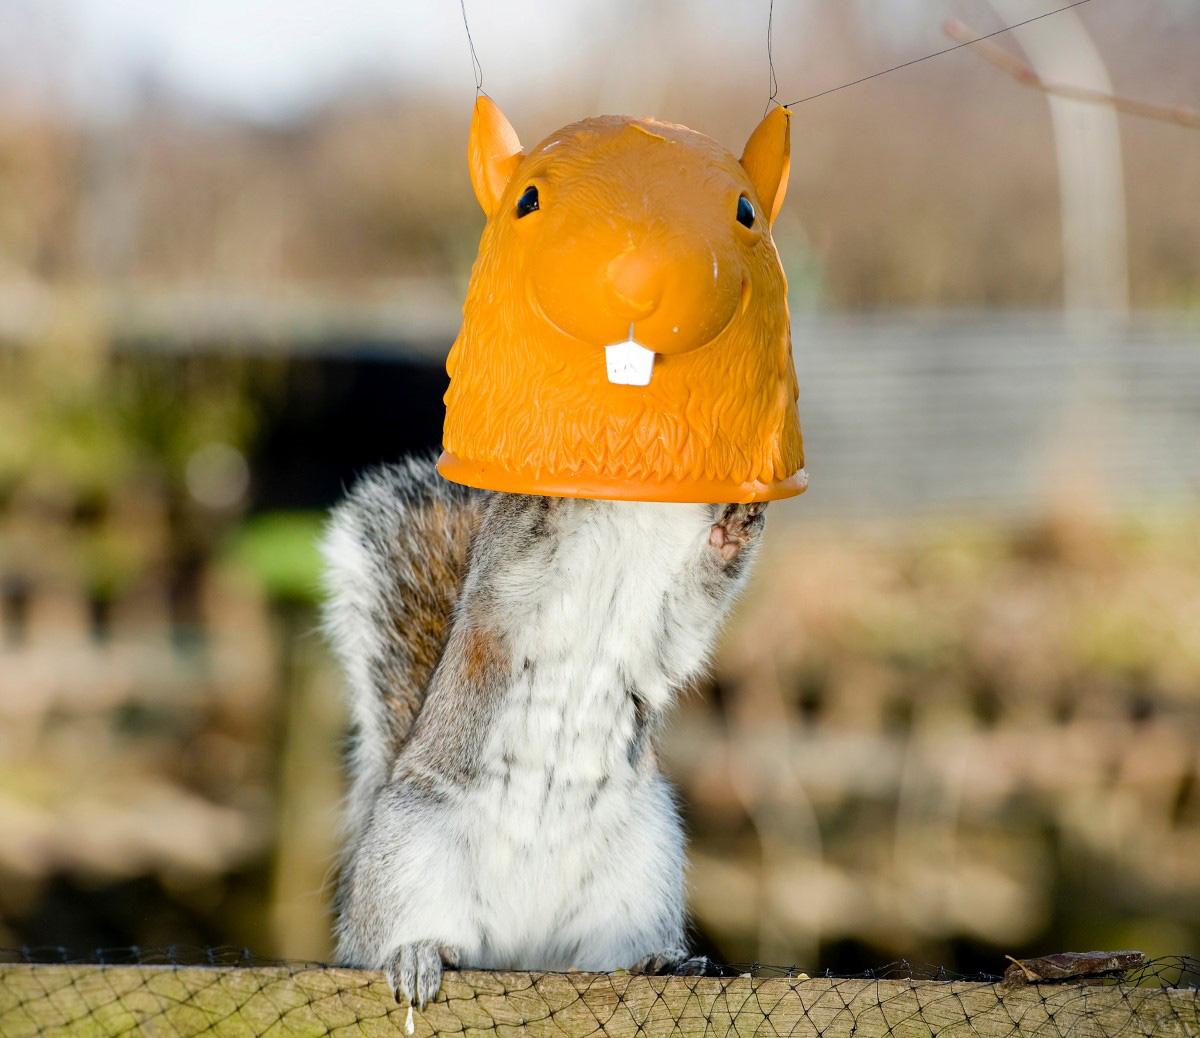 The Year in Pictures - 2013 - The Big Head Squirrel Feeder was installed in the Secret Garden Nature Reserve in Southampton. February 20, 2013.